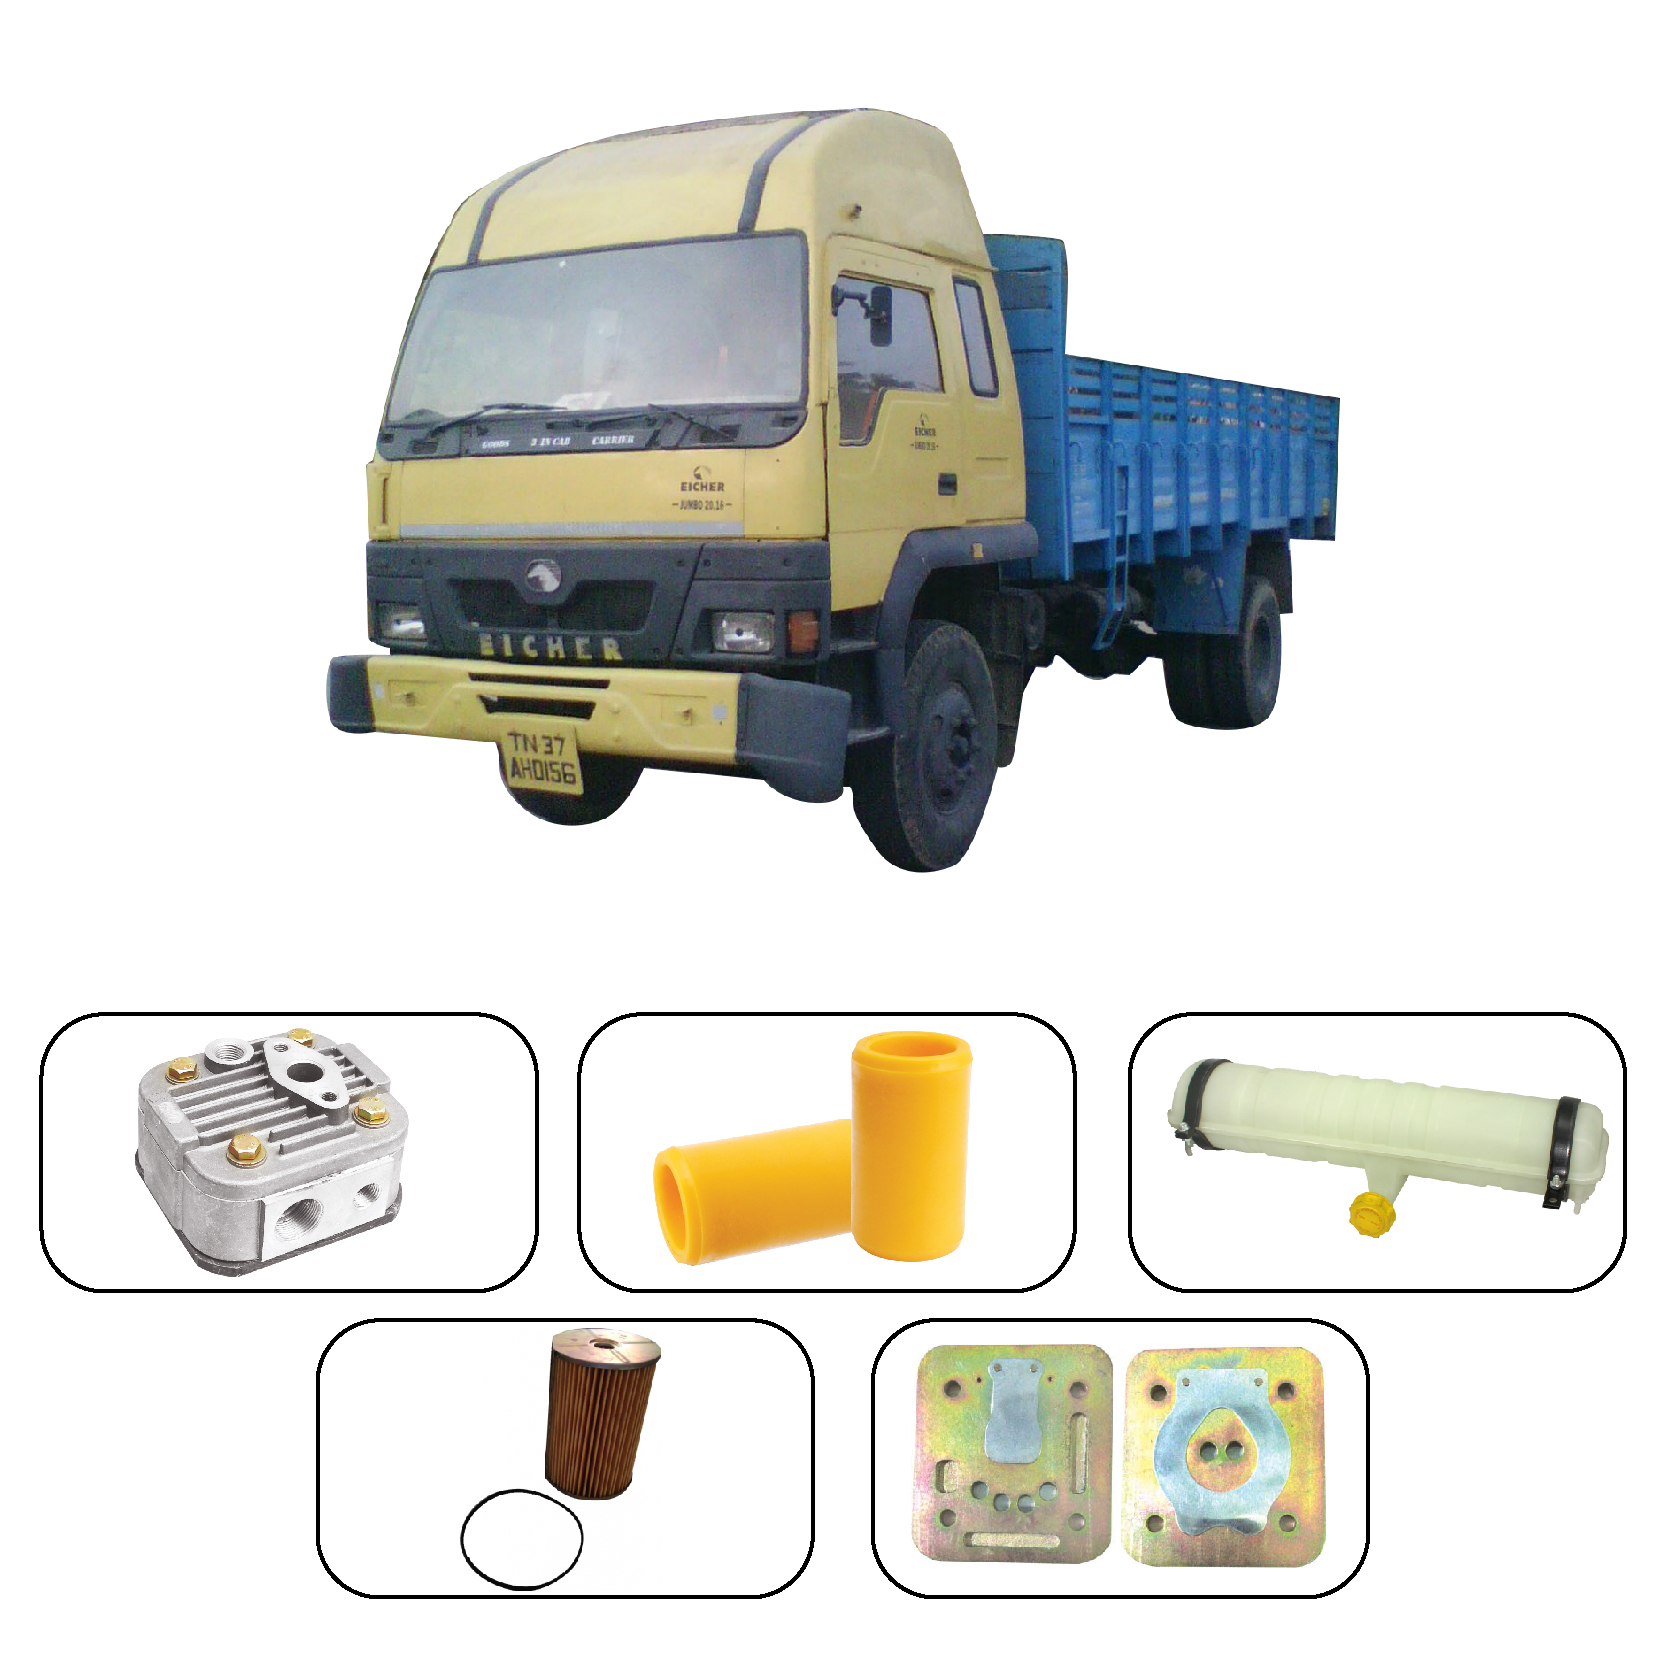 Eicher Jumbo Truck Spare Parts Available At TRENDY